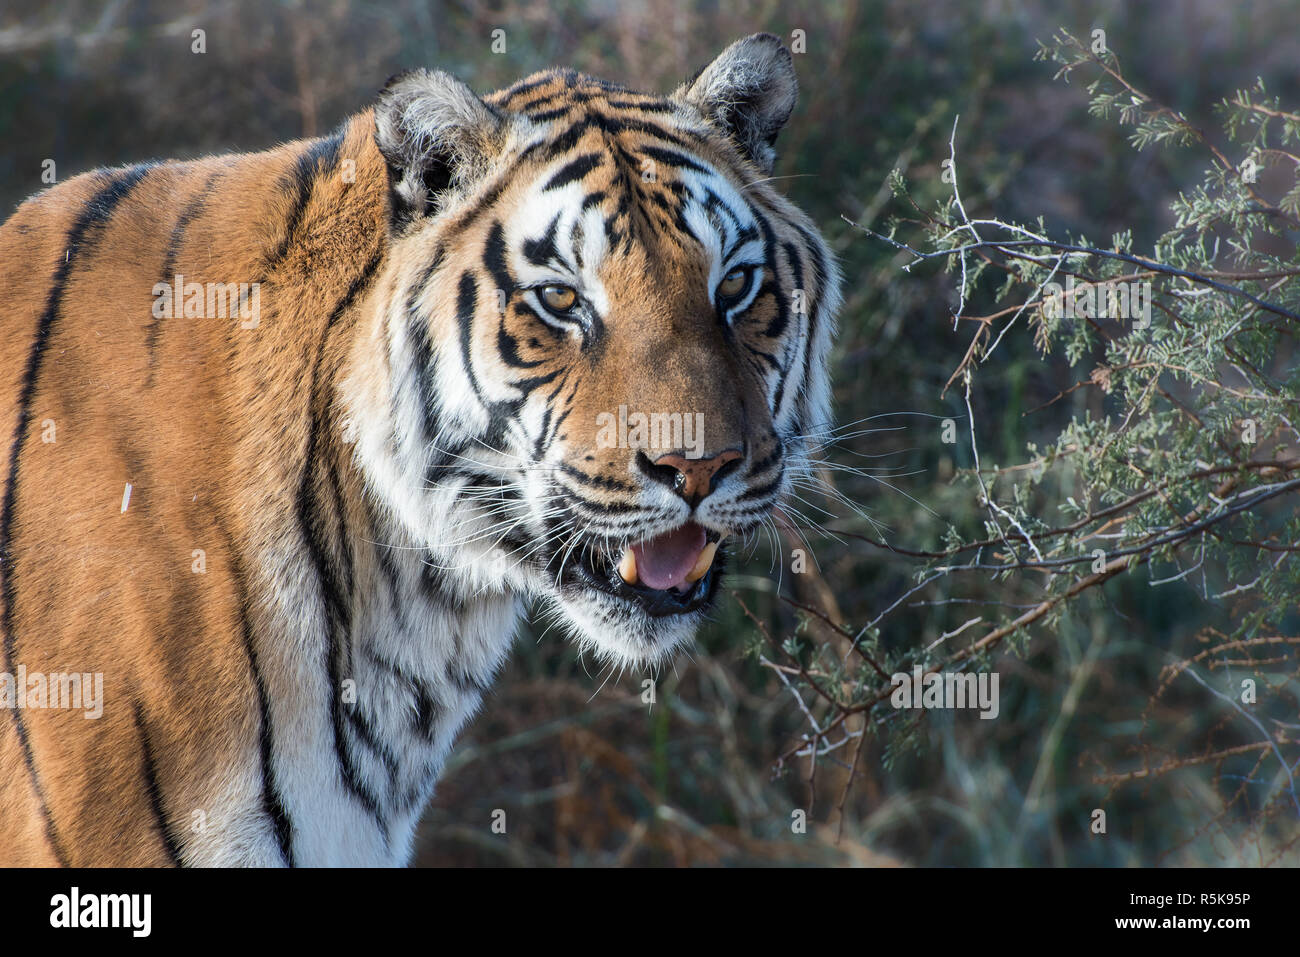 Portrait of a Tiger with Open Mouth Stock Photo